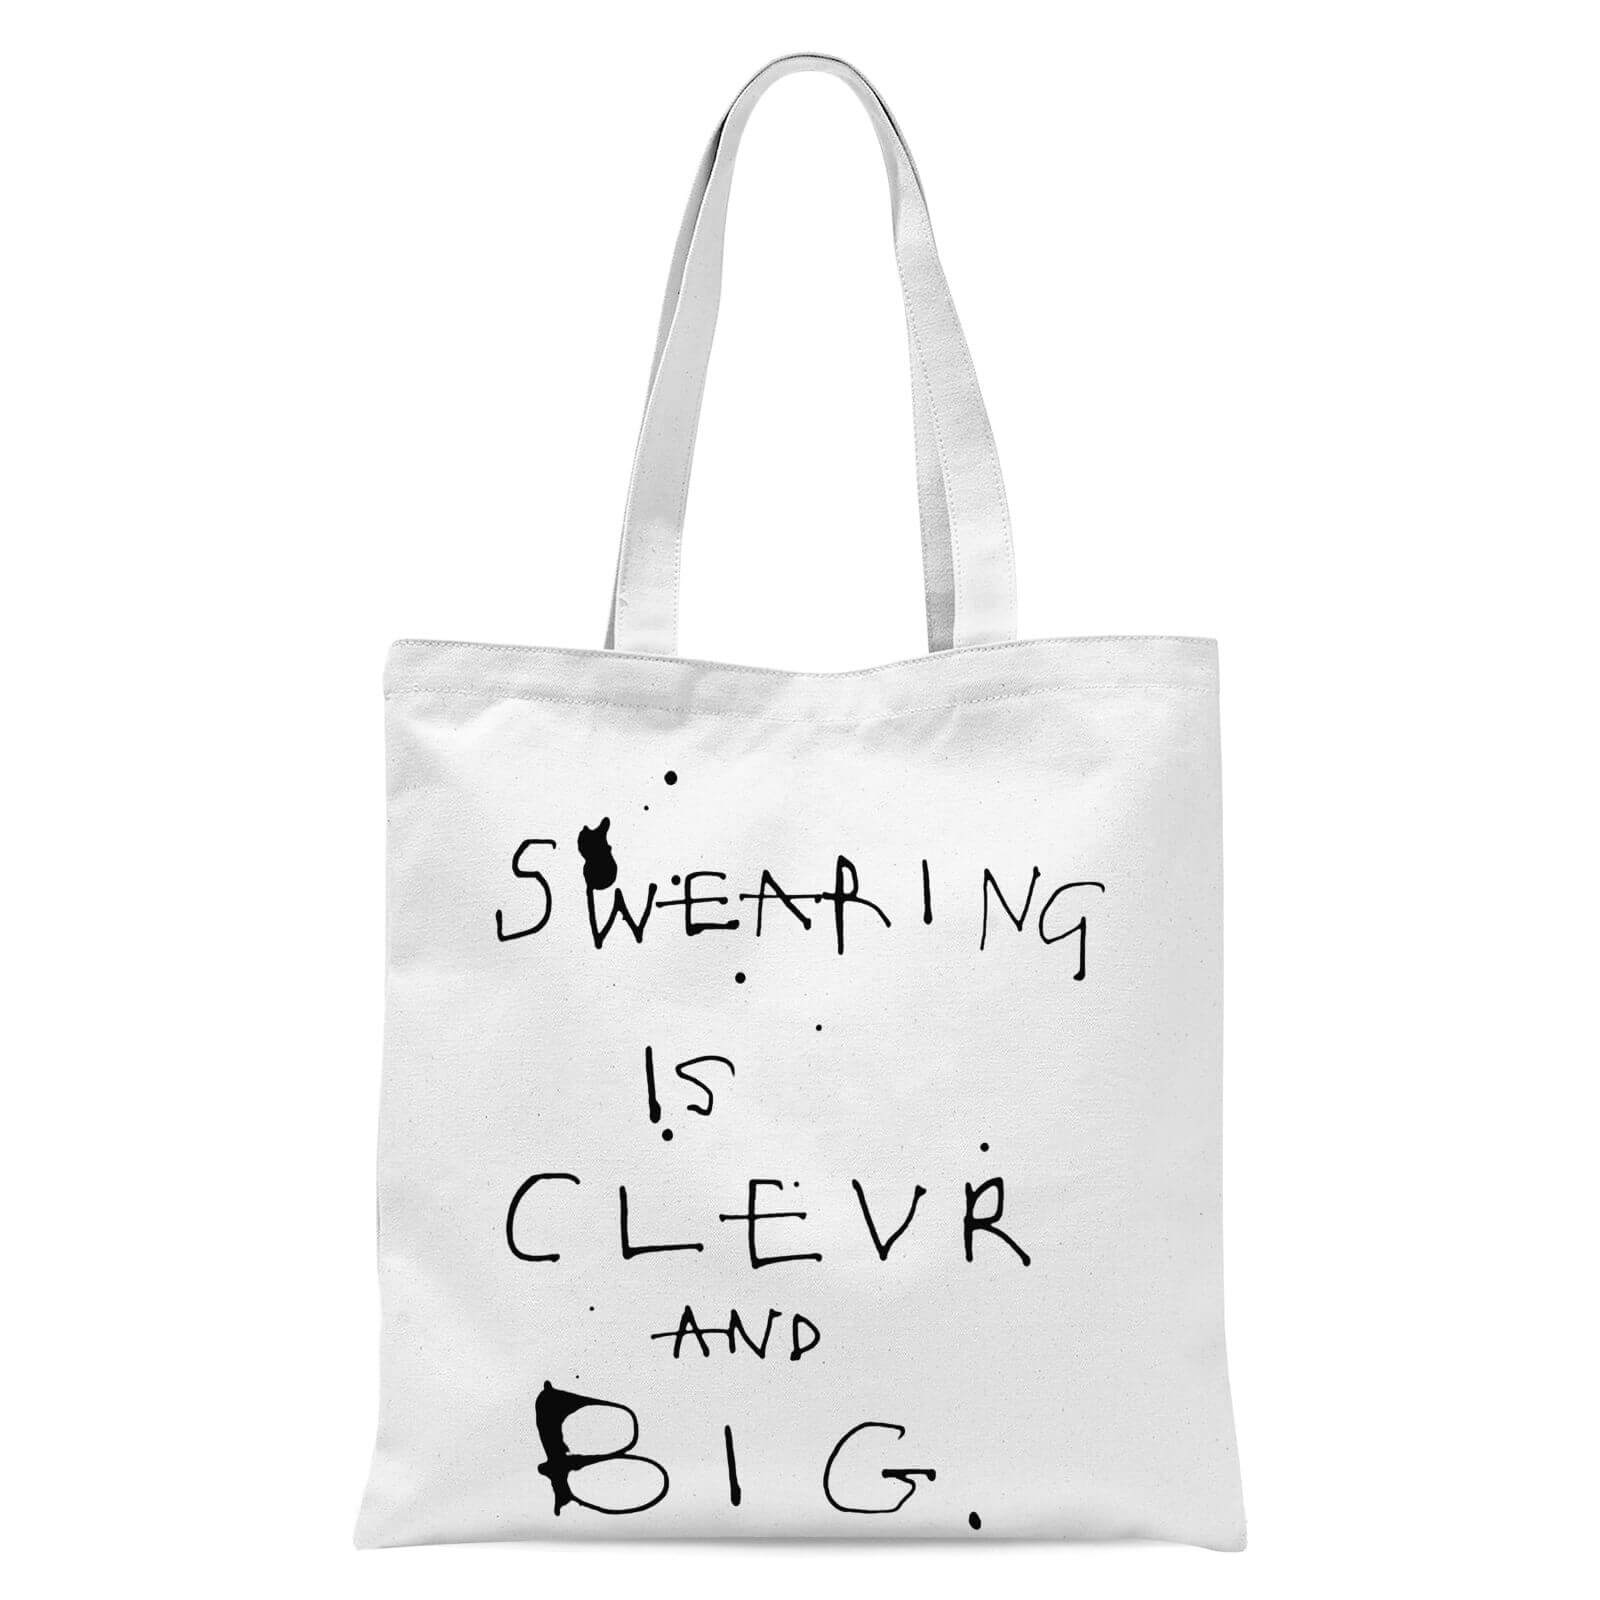 Poet and Painter Swearing Is Tote Bag - White